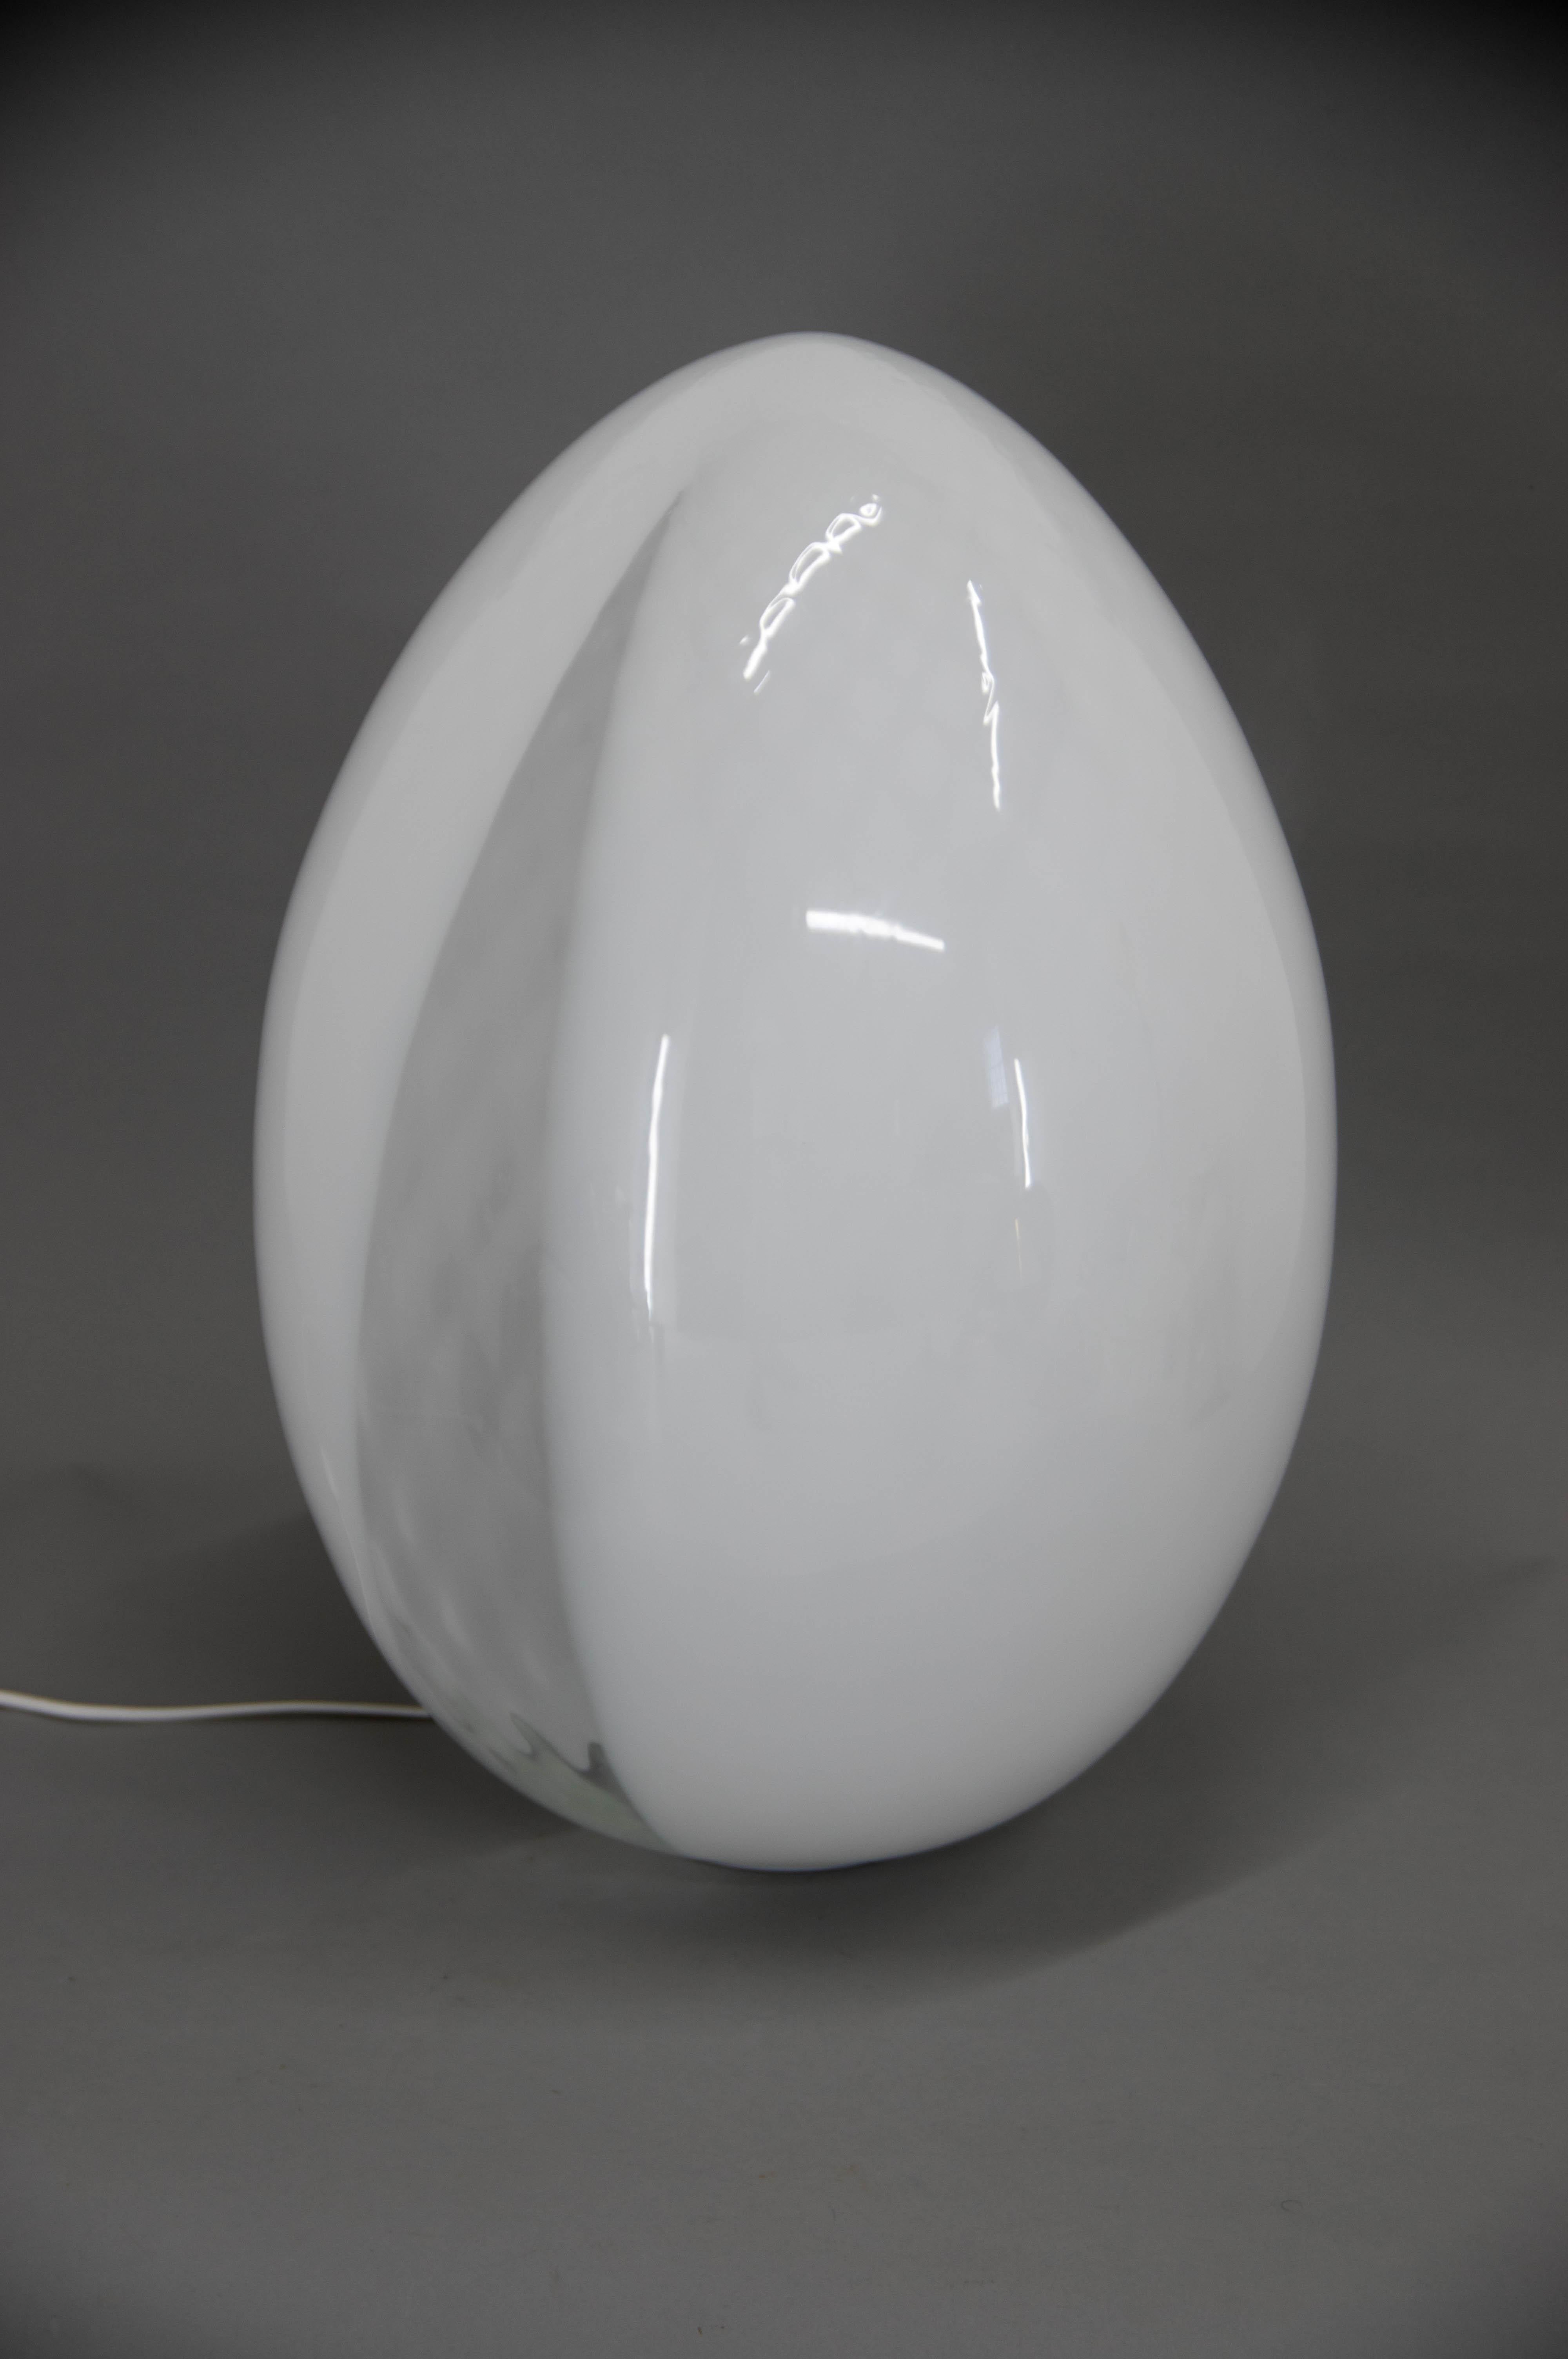 Big Murano glass egg lamp.
Made of white and transparent glass
Excellent condition.
1x100W, E25-E27 bulb
US plug adapter included.